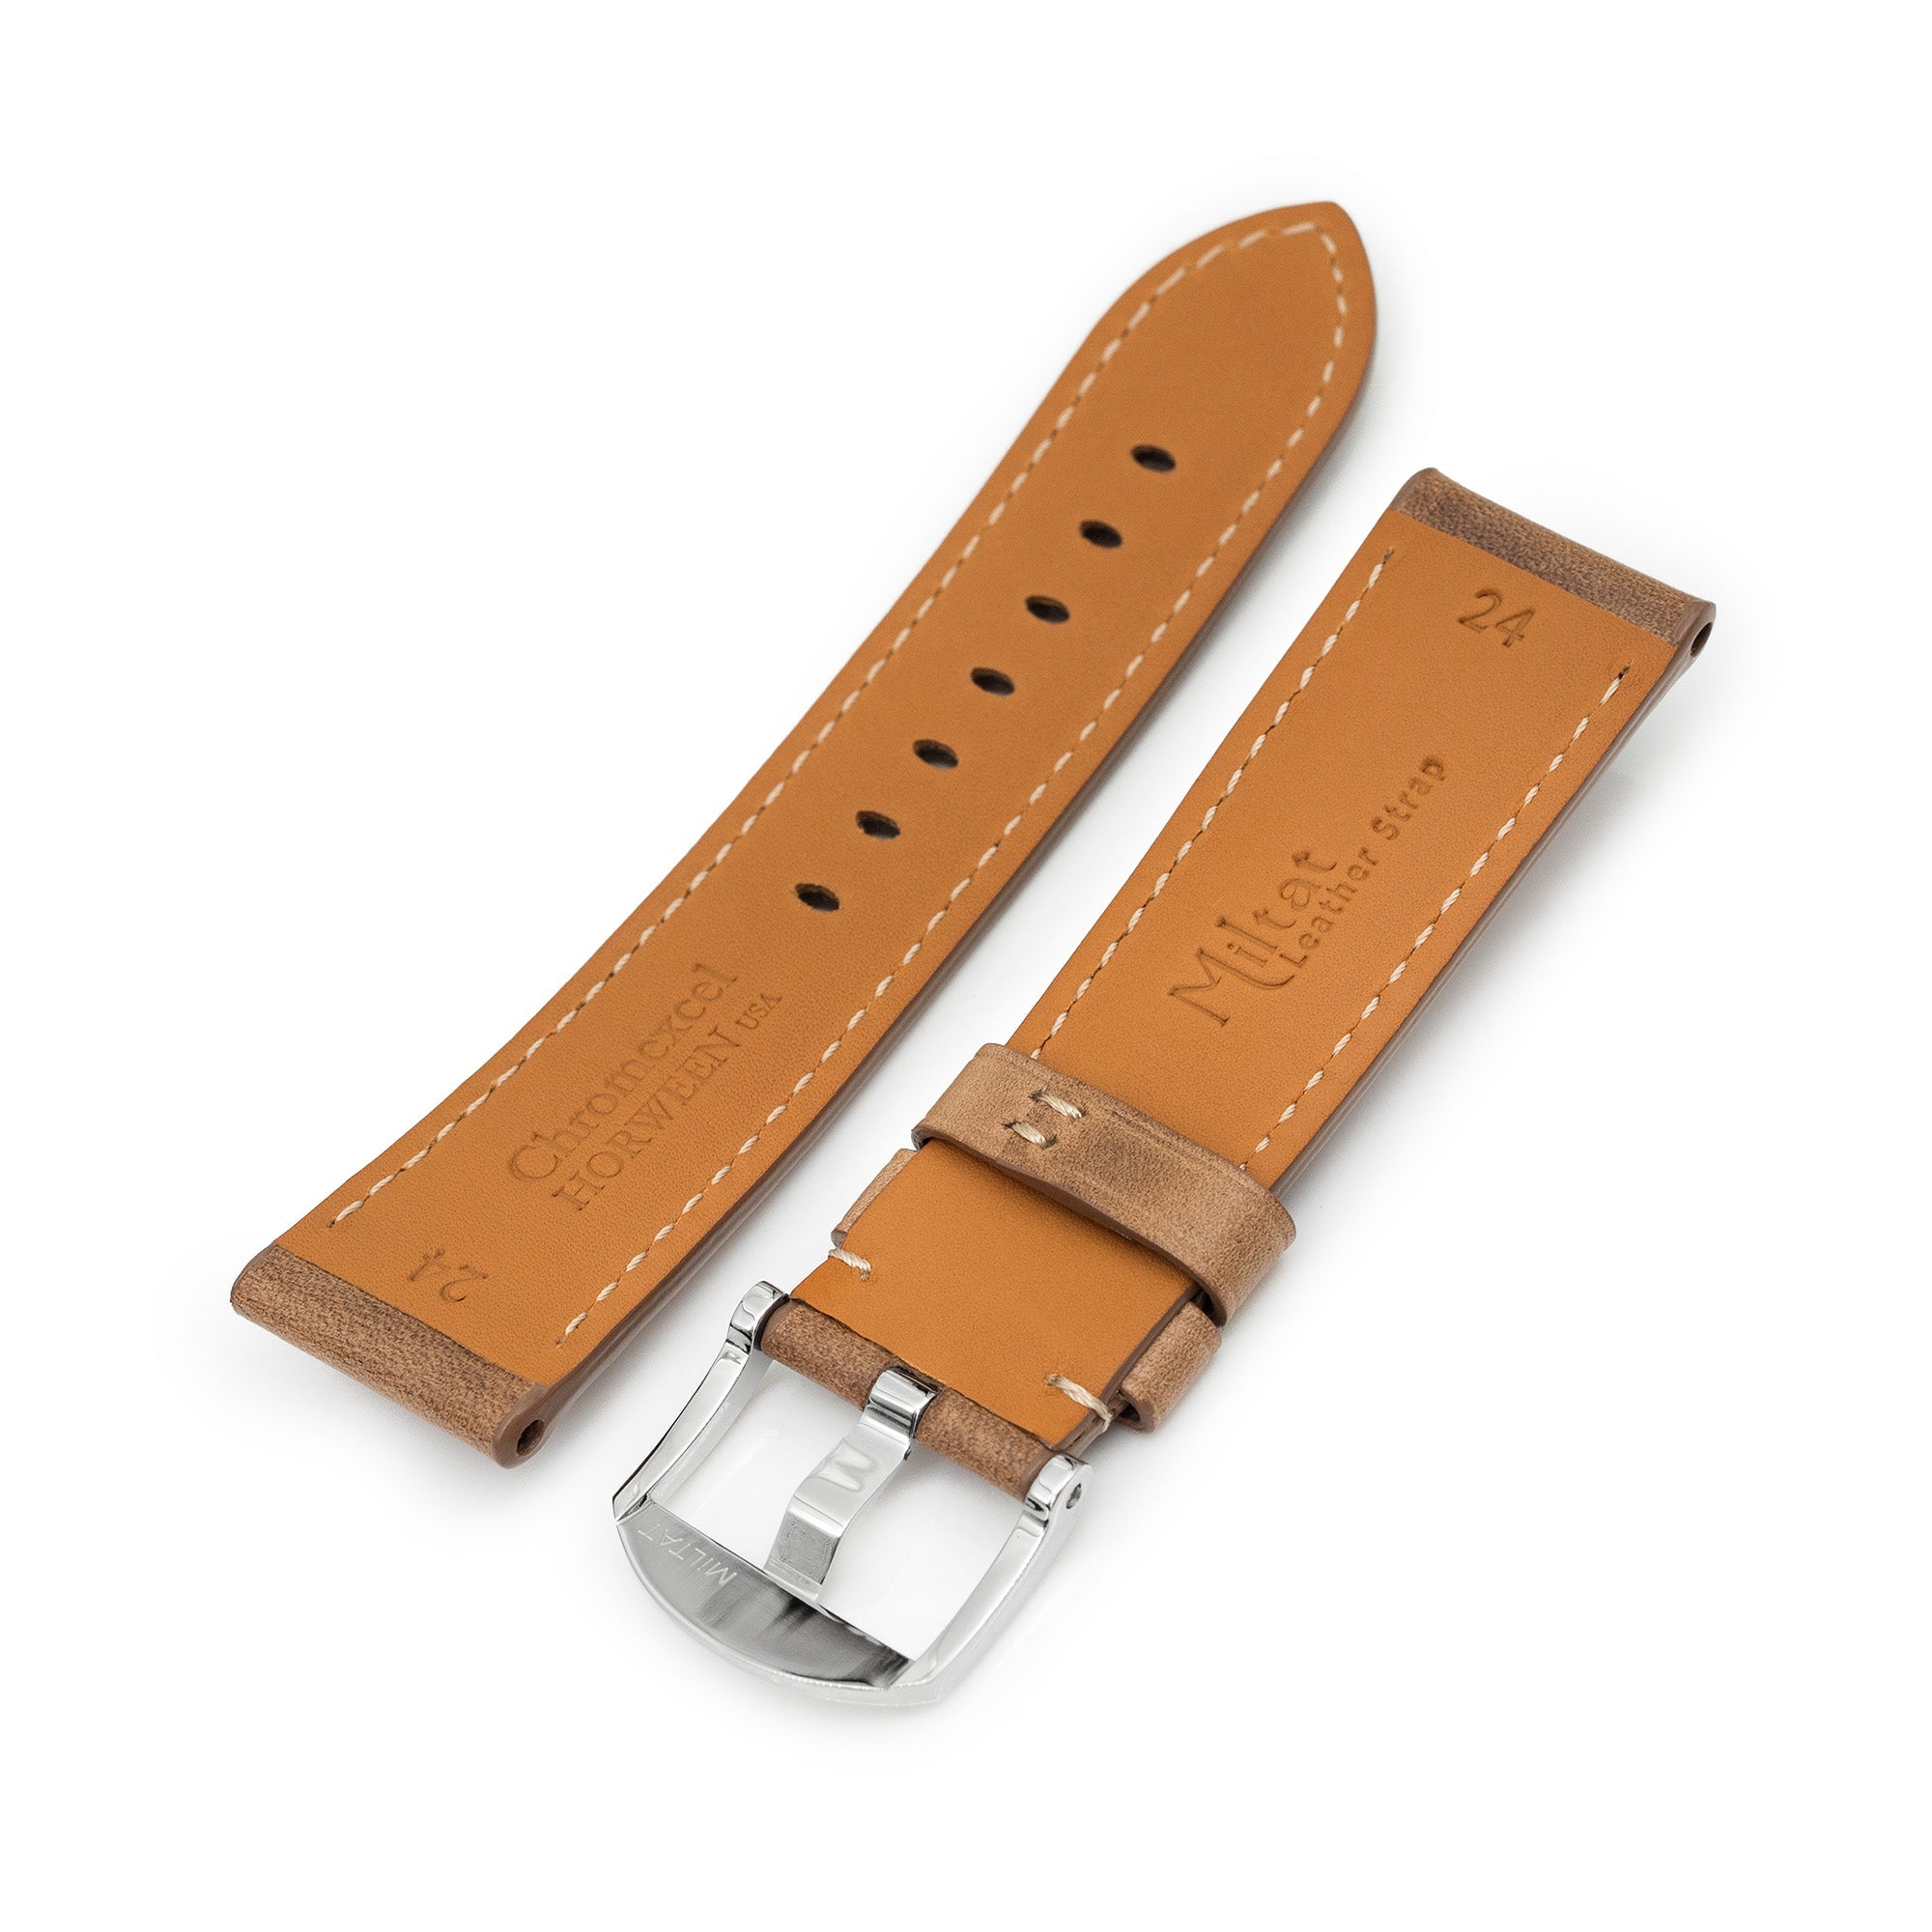 Pam Collection, Vintage Brown Horween Chromexcel Leather Watch Strap for Panerai, Beige Stitching Strapcode watch bands